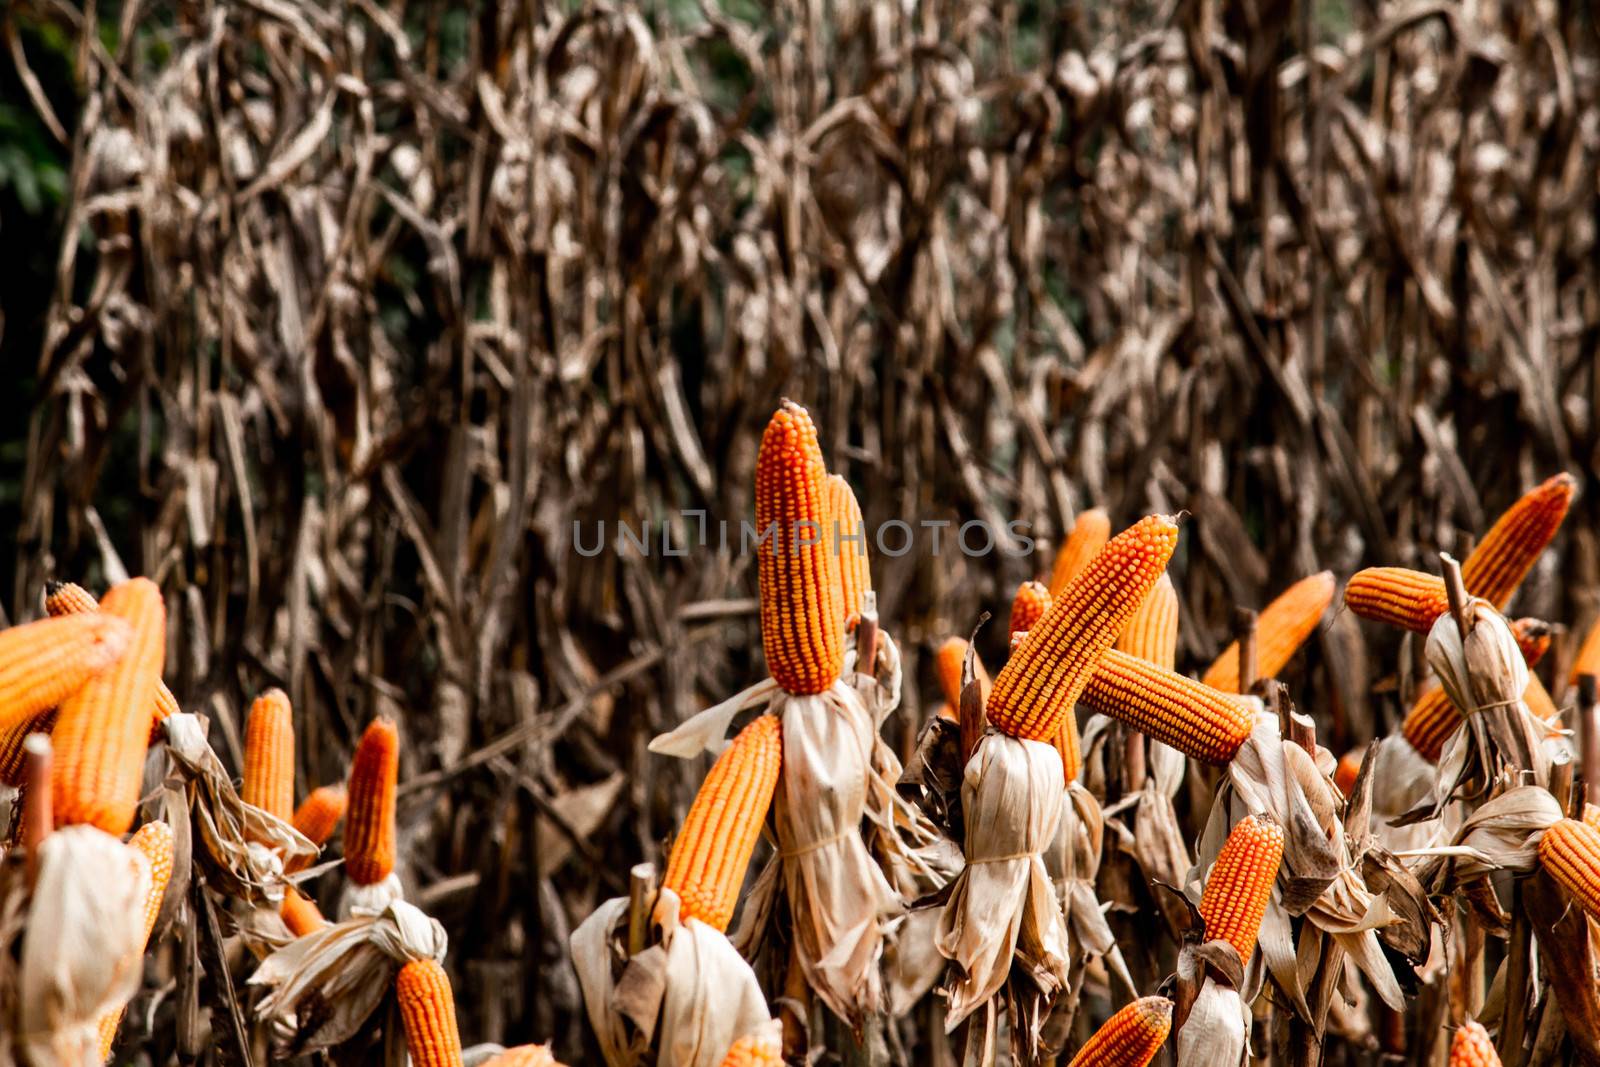 Dry corn cob with mature yellow corn growing ready for harvest in an agricultural field.